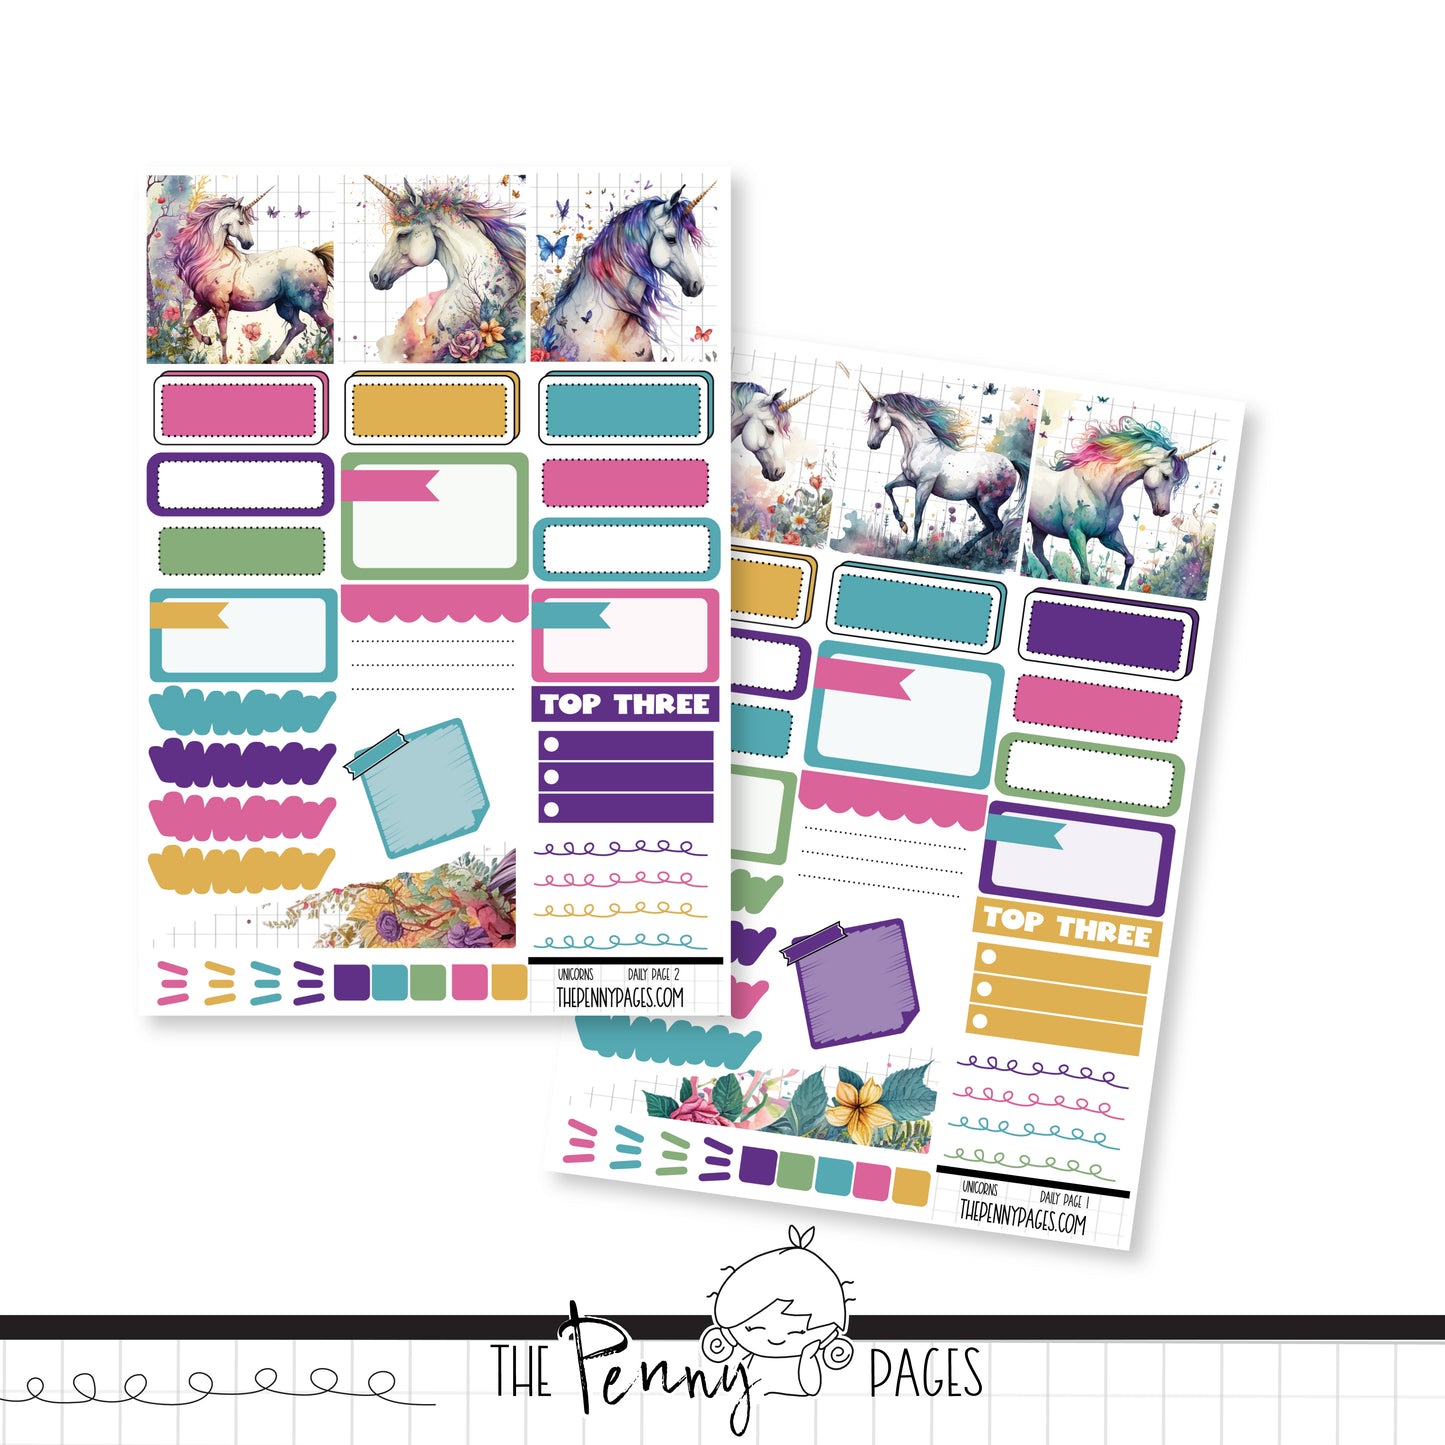 #1042 Unicorns  - Daily Pages